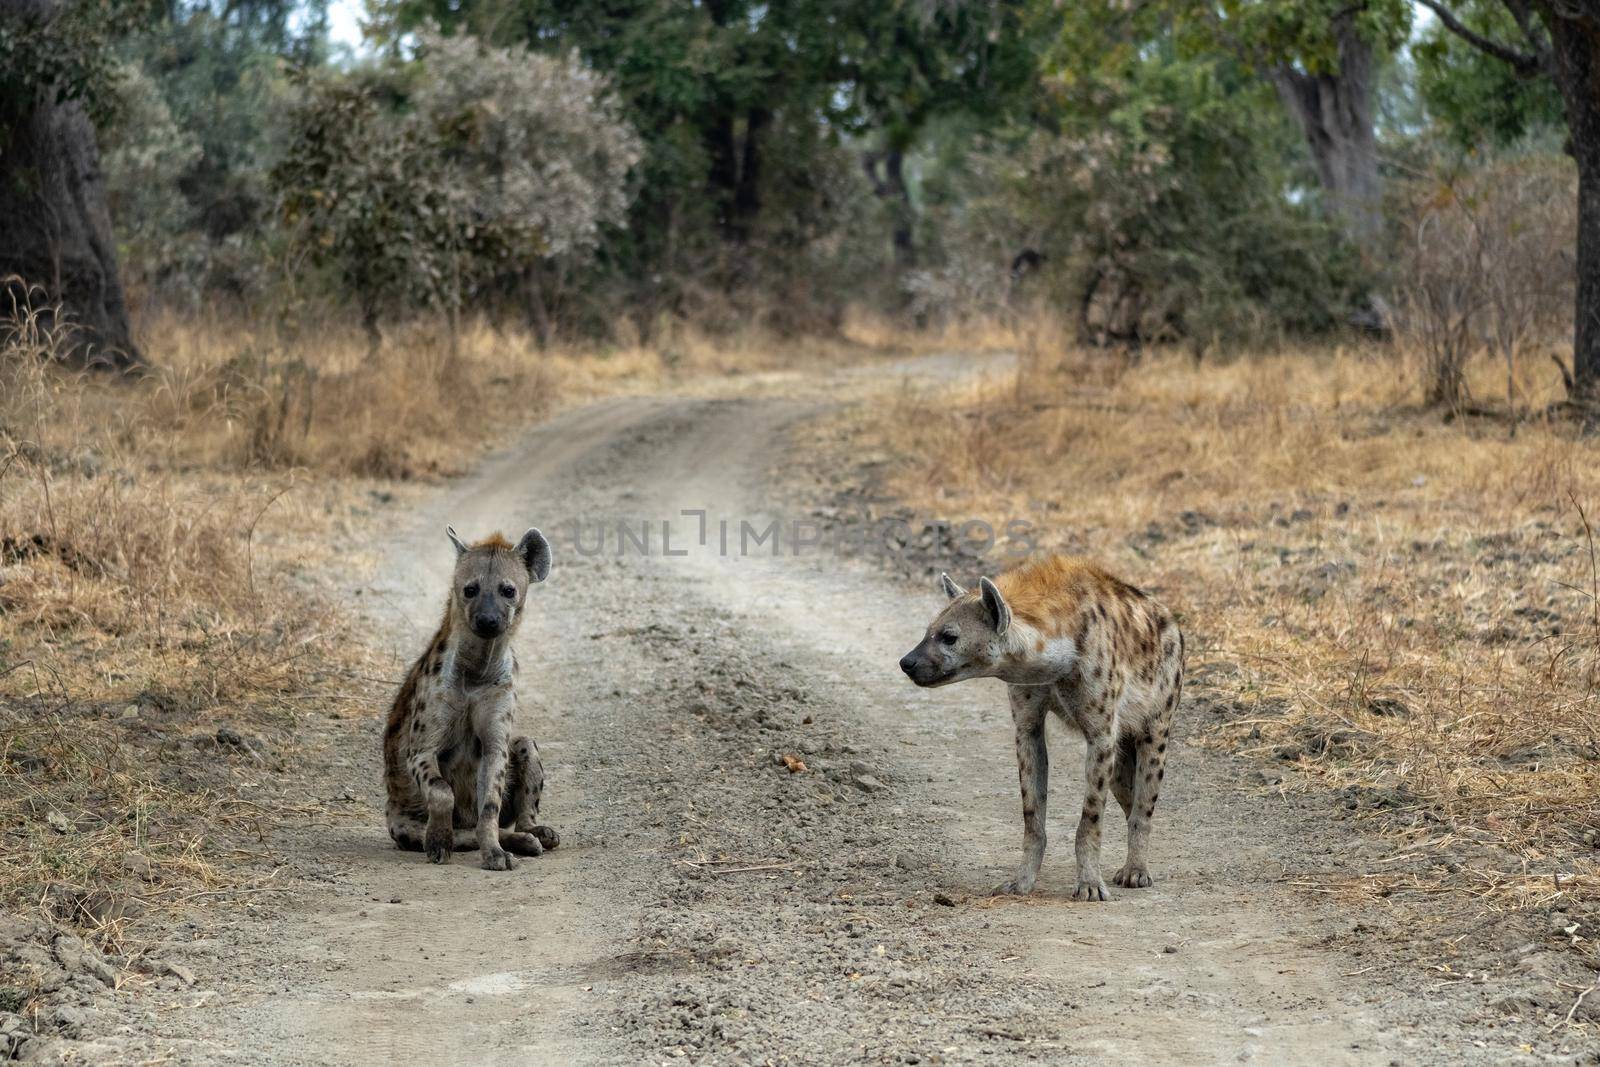 Wonderful closeup of spotted hyenas in the savanna by silentstock639